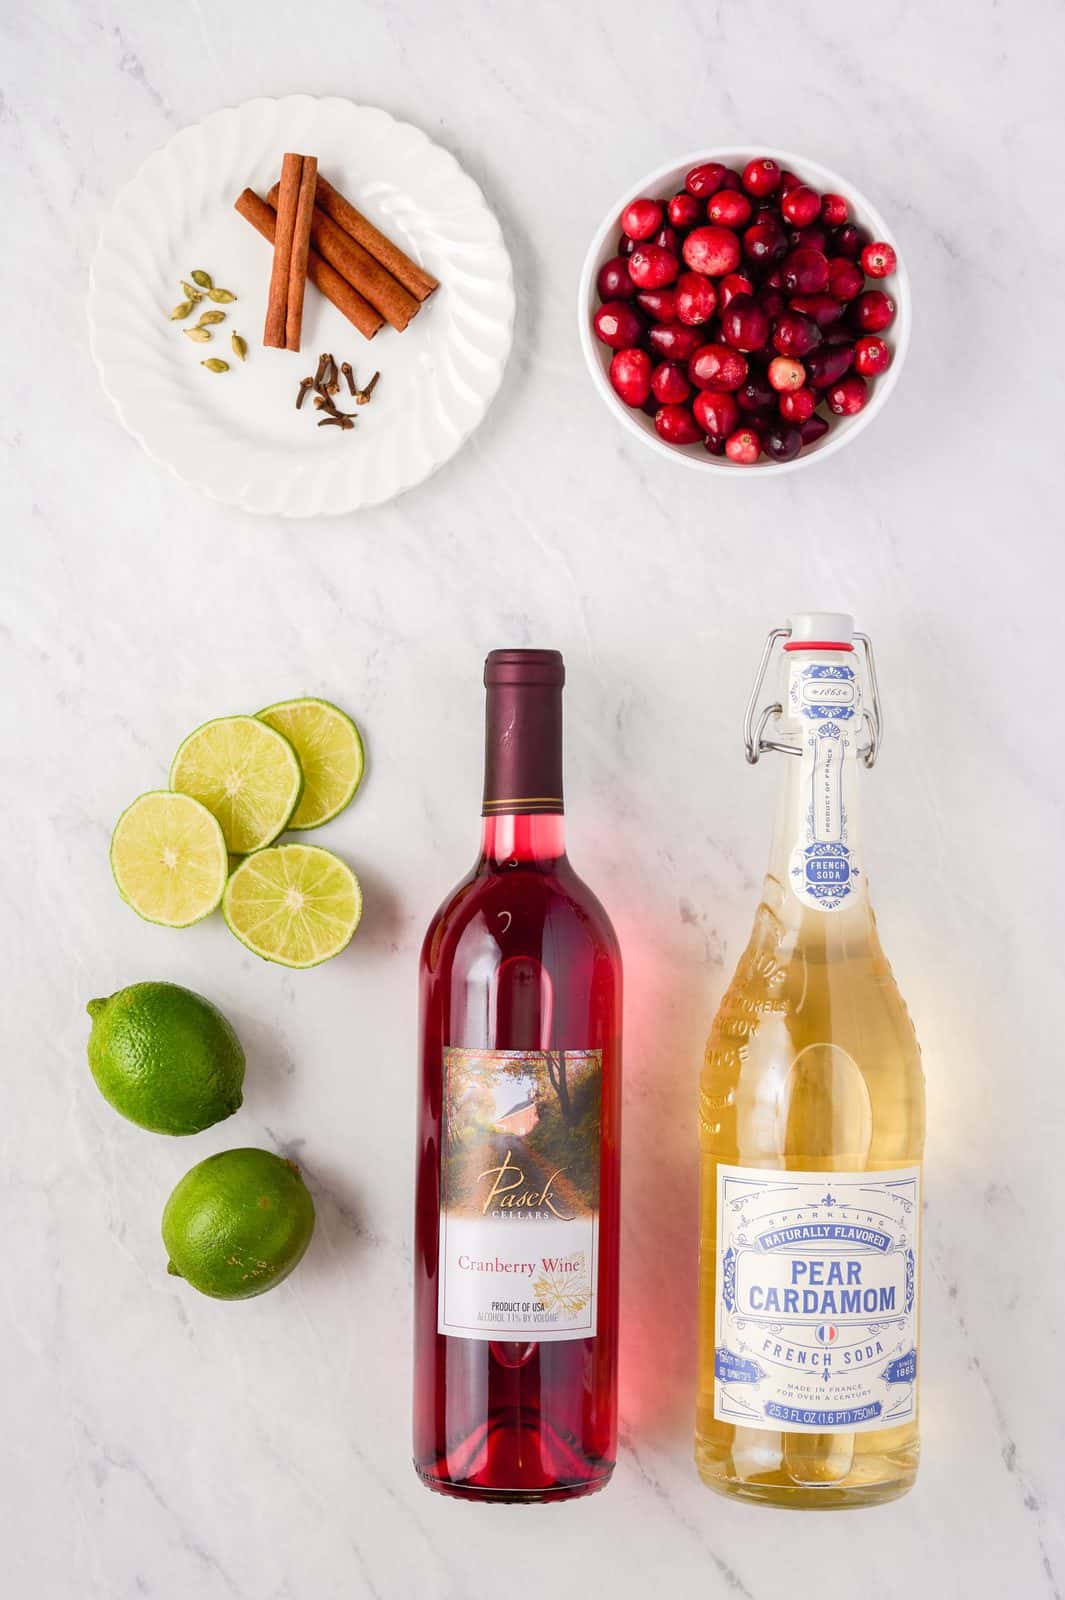 Ingredients needed: cranberry wine, pear cardamom soda, cloves, cinnamon sticks, limes, cranberries and cardamom pods.